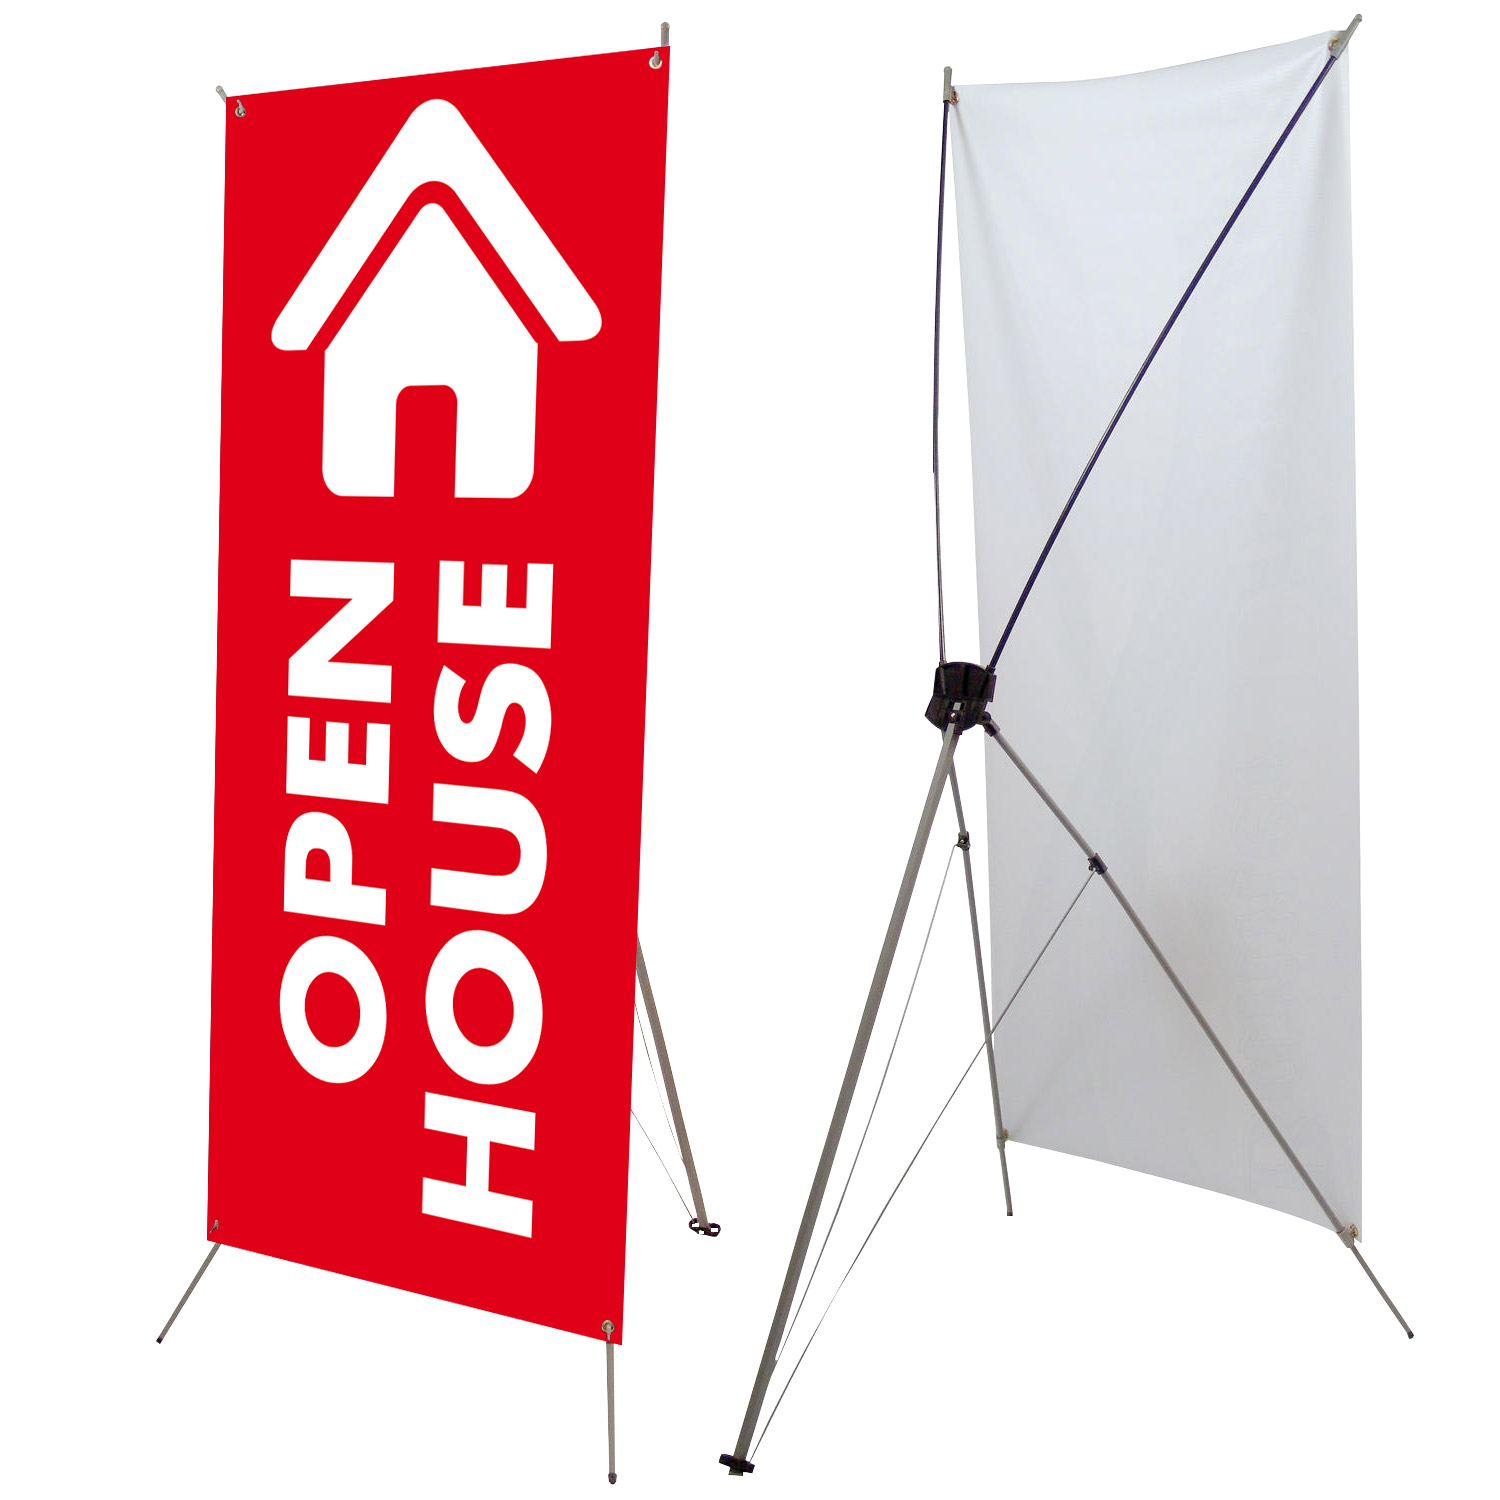 Tripod X with 48" x 24" Banner